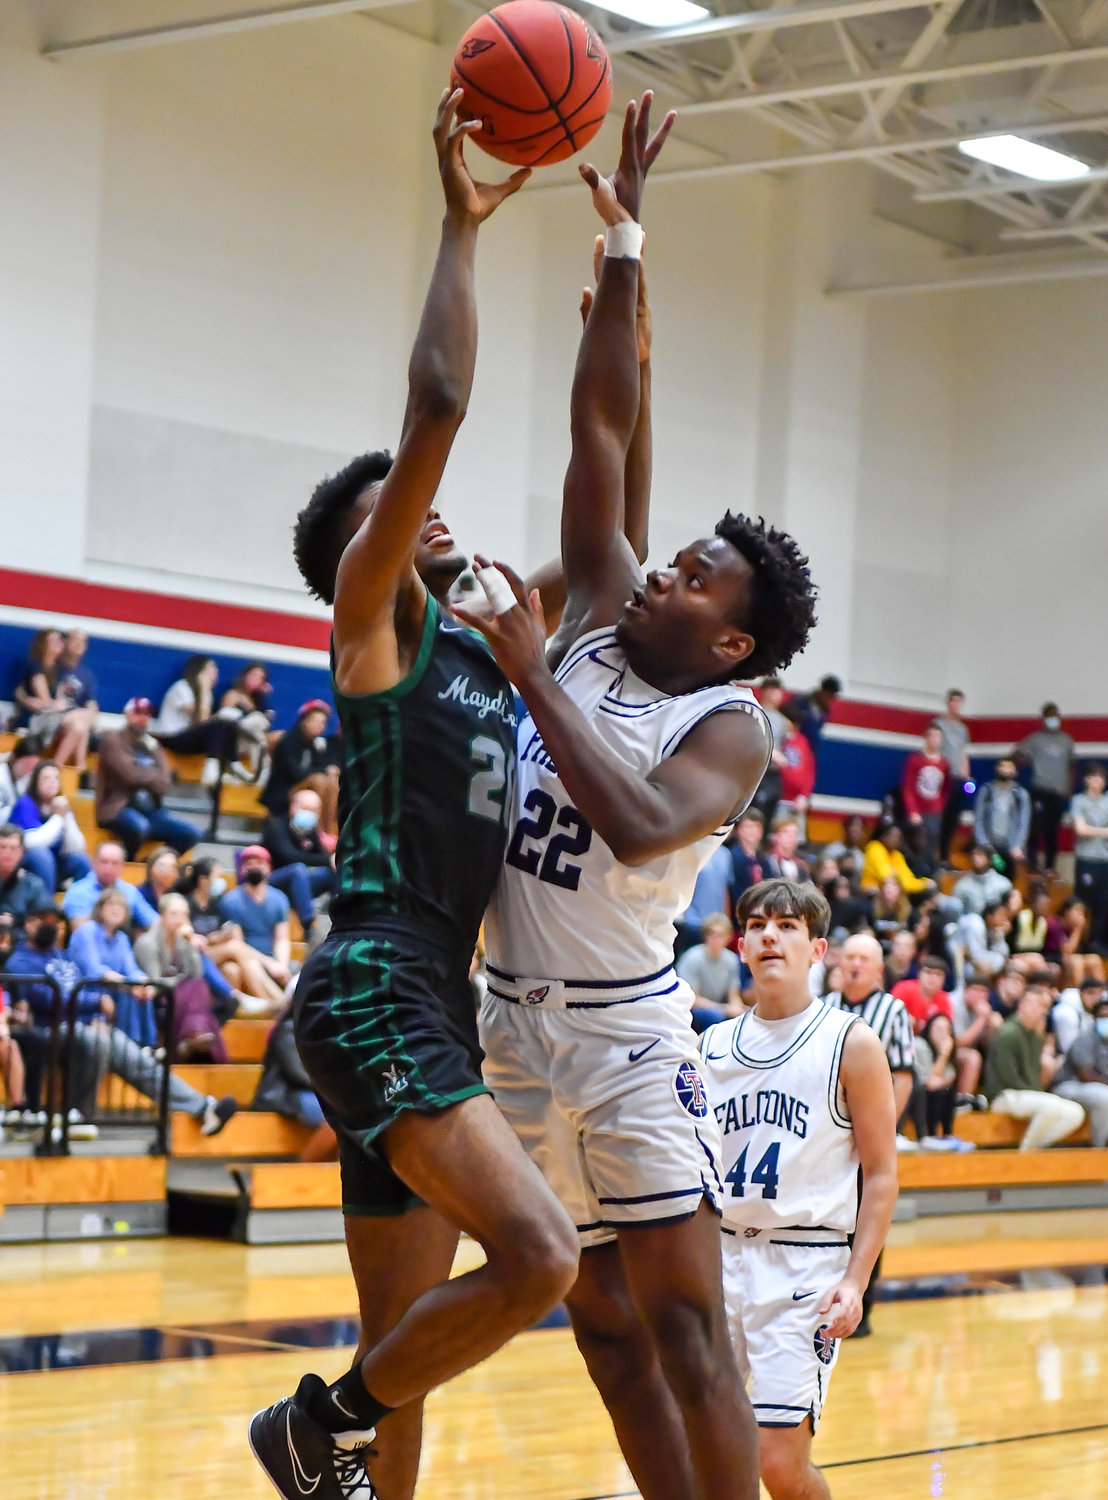 Katy Tx. Jan 14, 2022:   Mayde Creeks Jay Franklin #20 goes up for the shot guarded by Tompkins Don Ojiako #22 during the Tompkins vs Mayde Creek game.  (Photo by Mark Goodman / Katy Times)